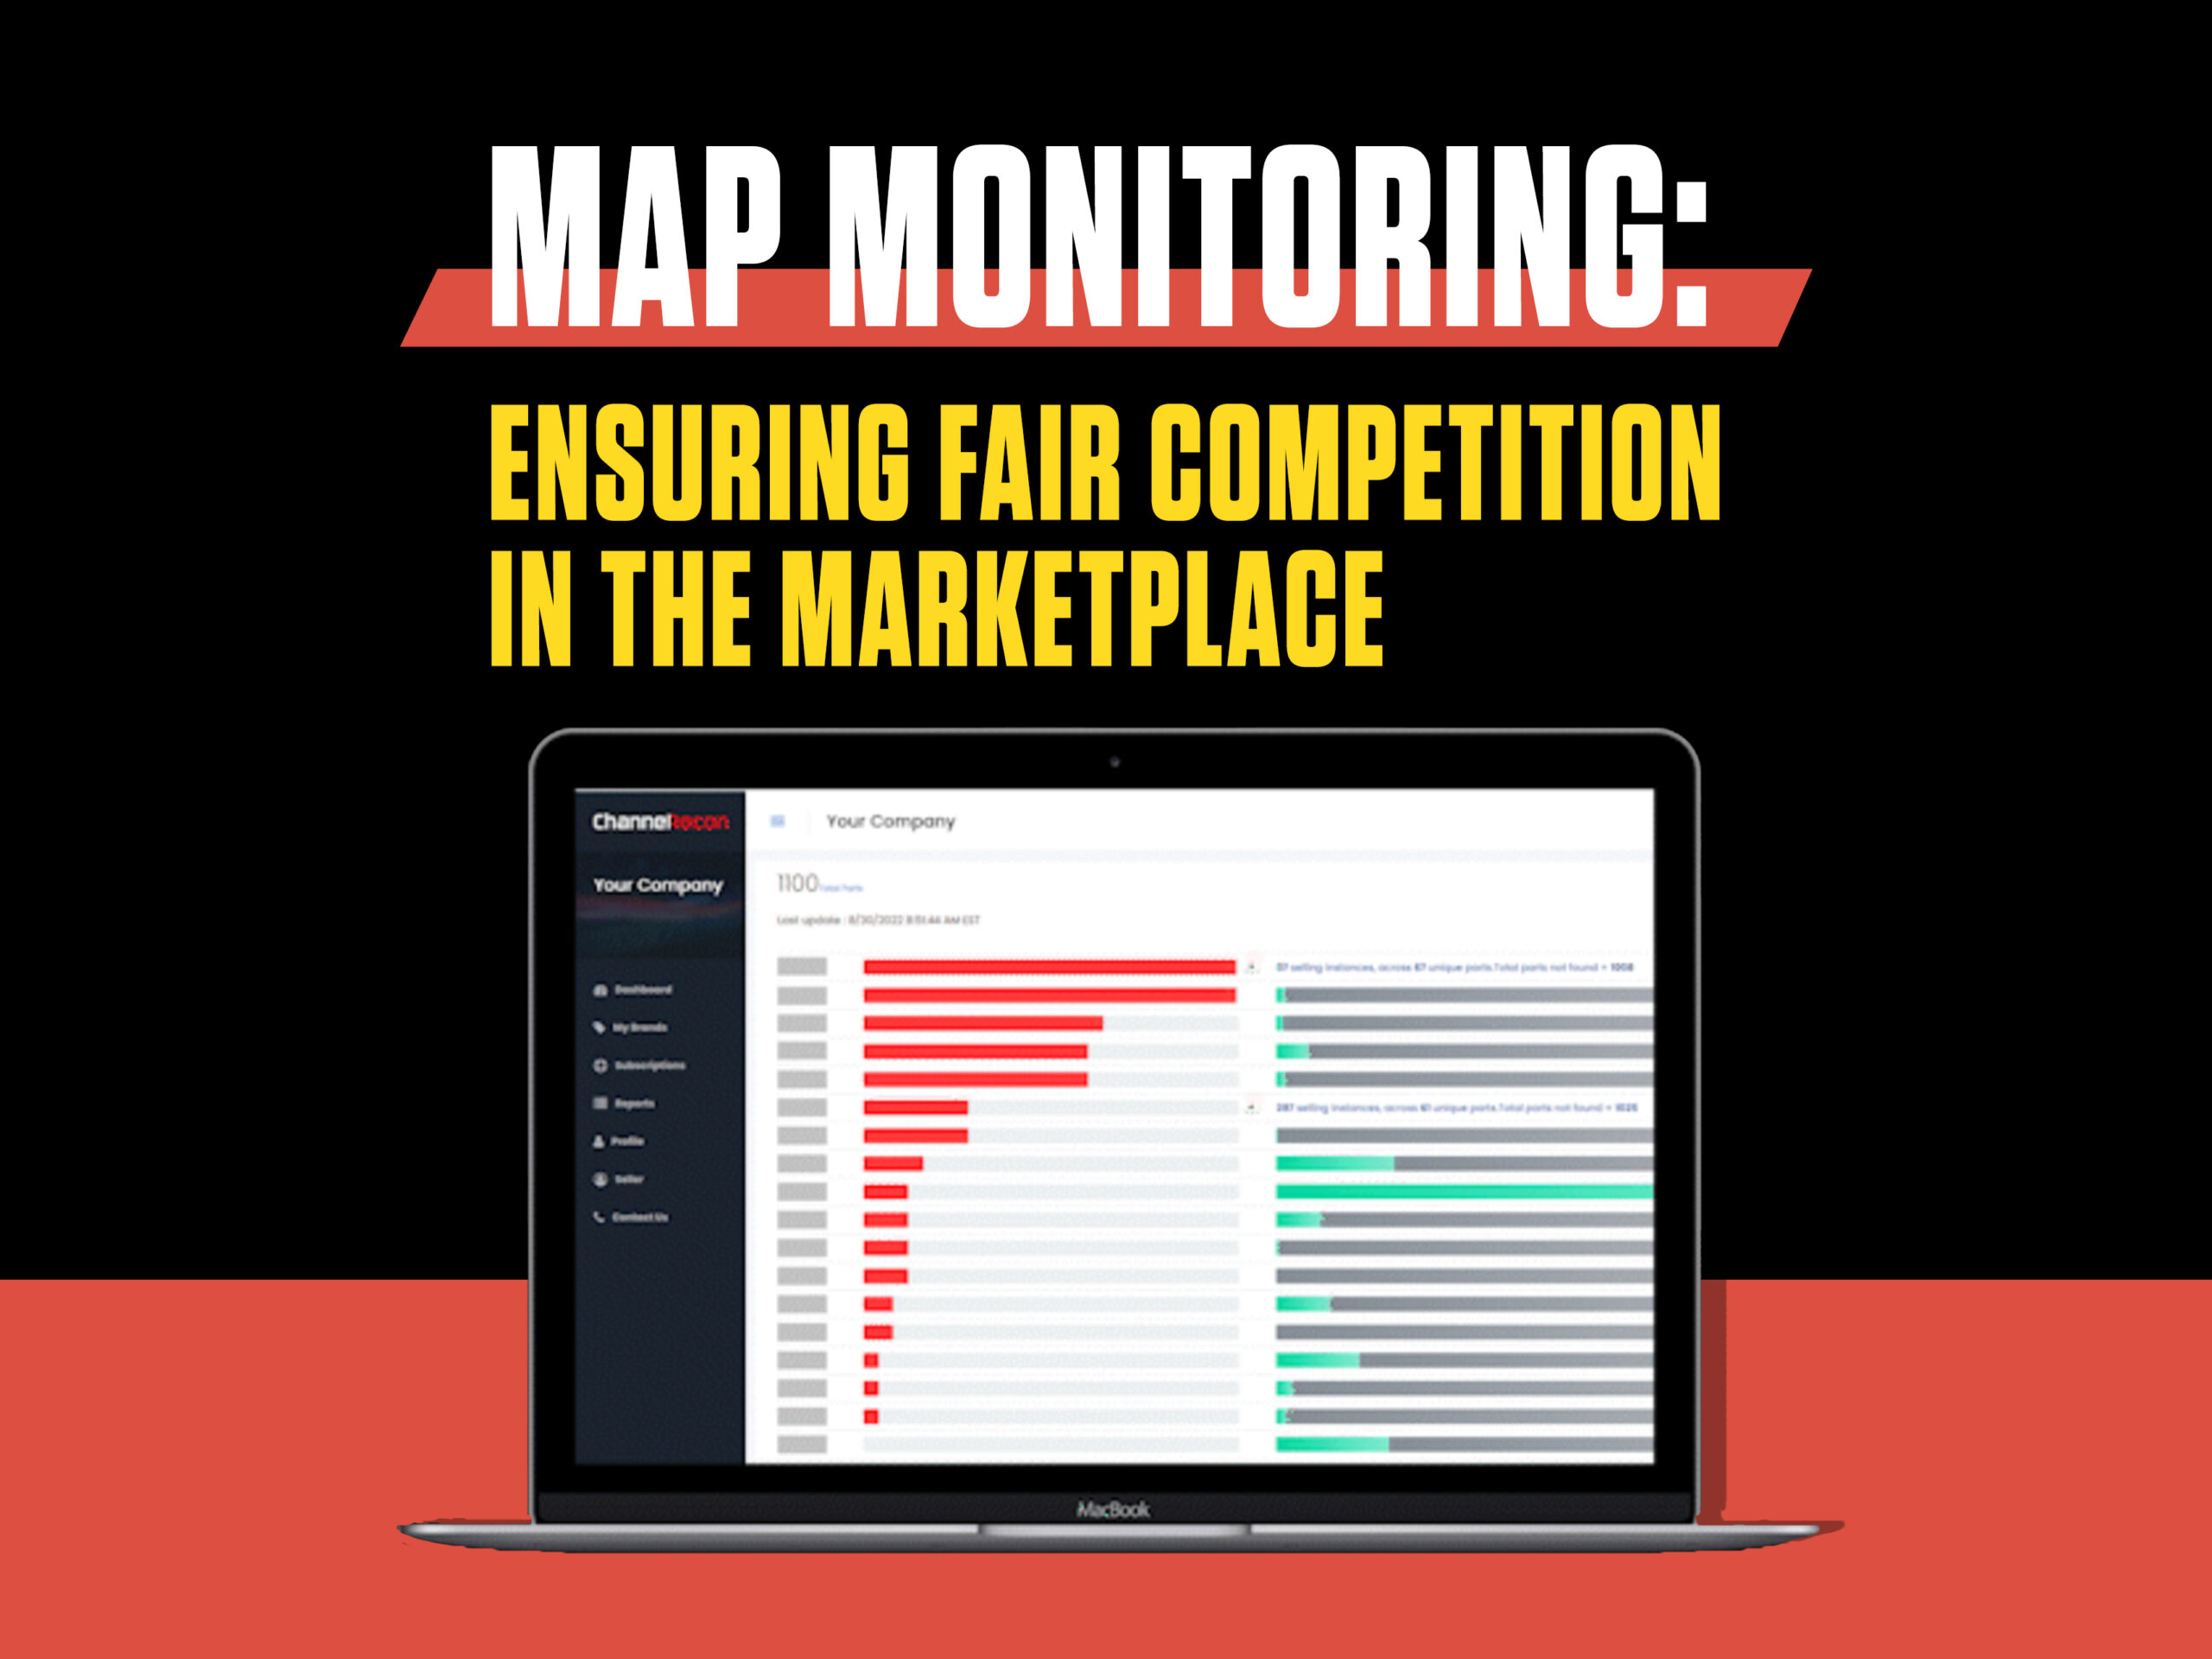 MAP Monitoring: Ensuring Fair Competition in the Marketplace